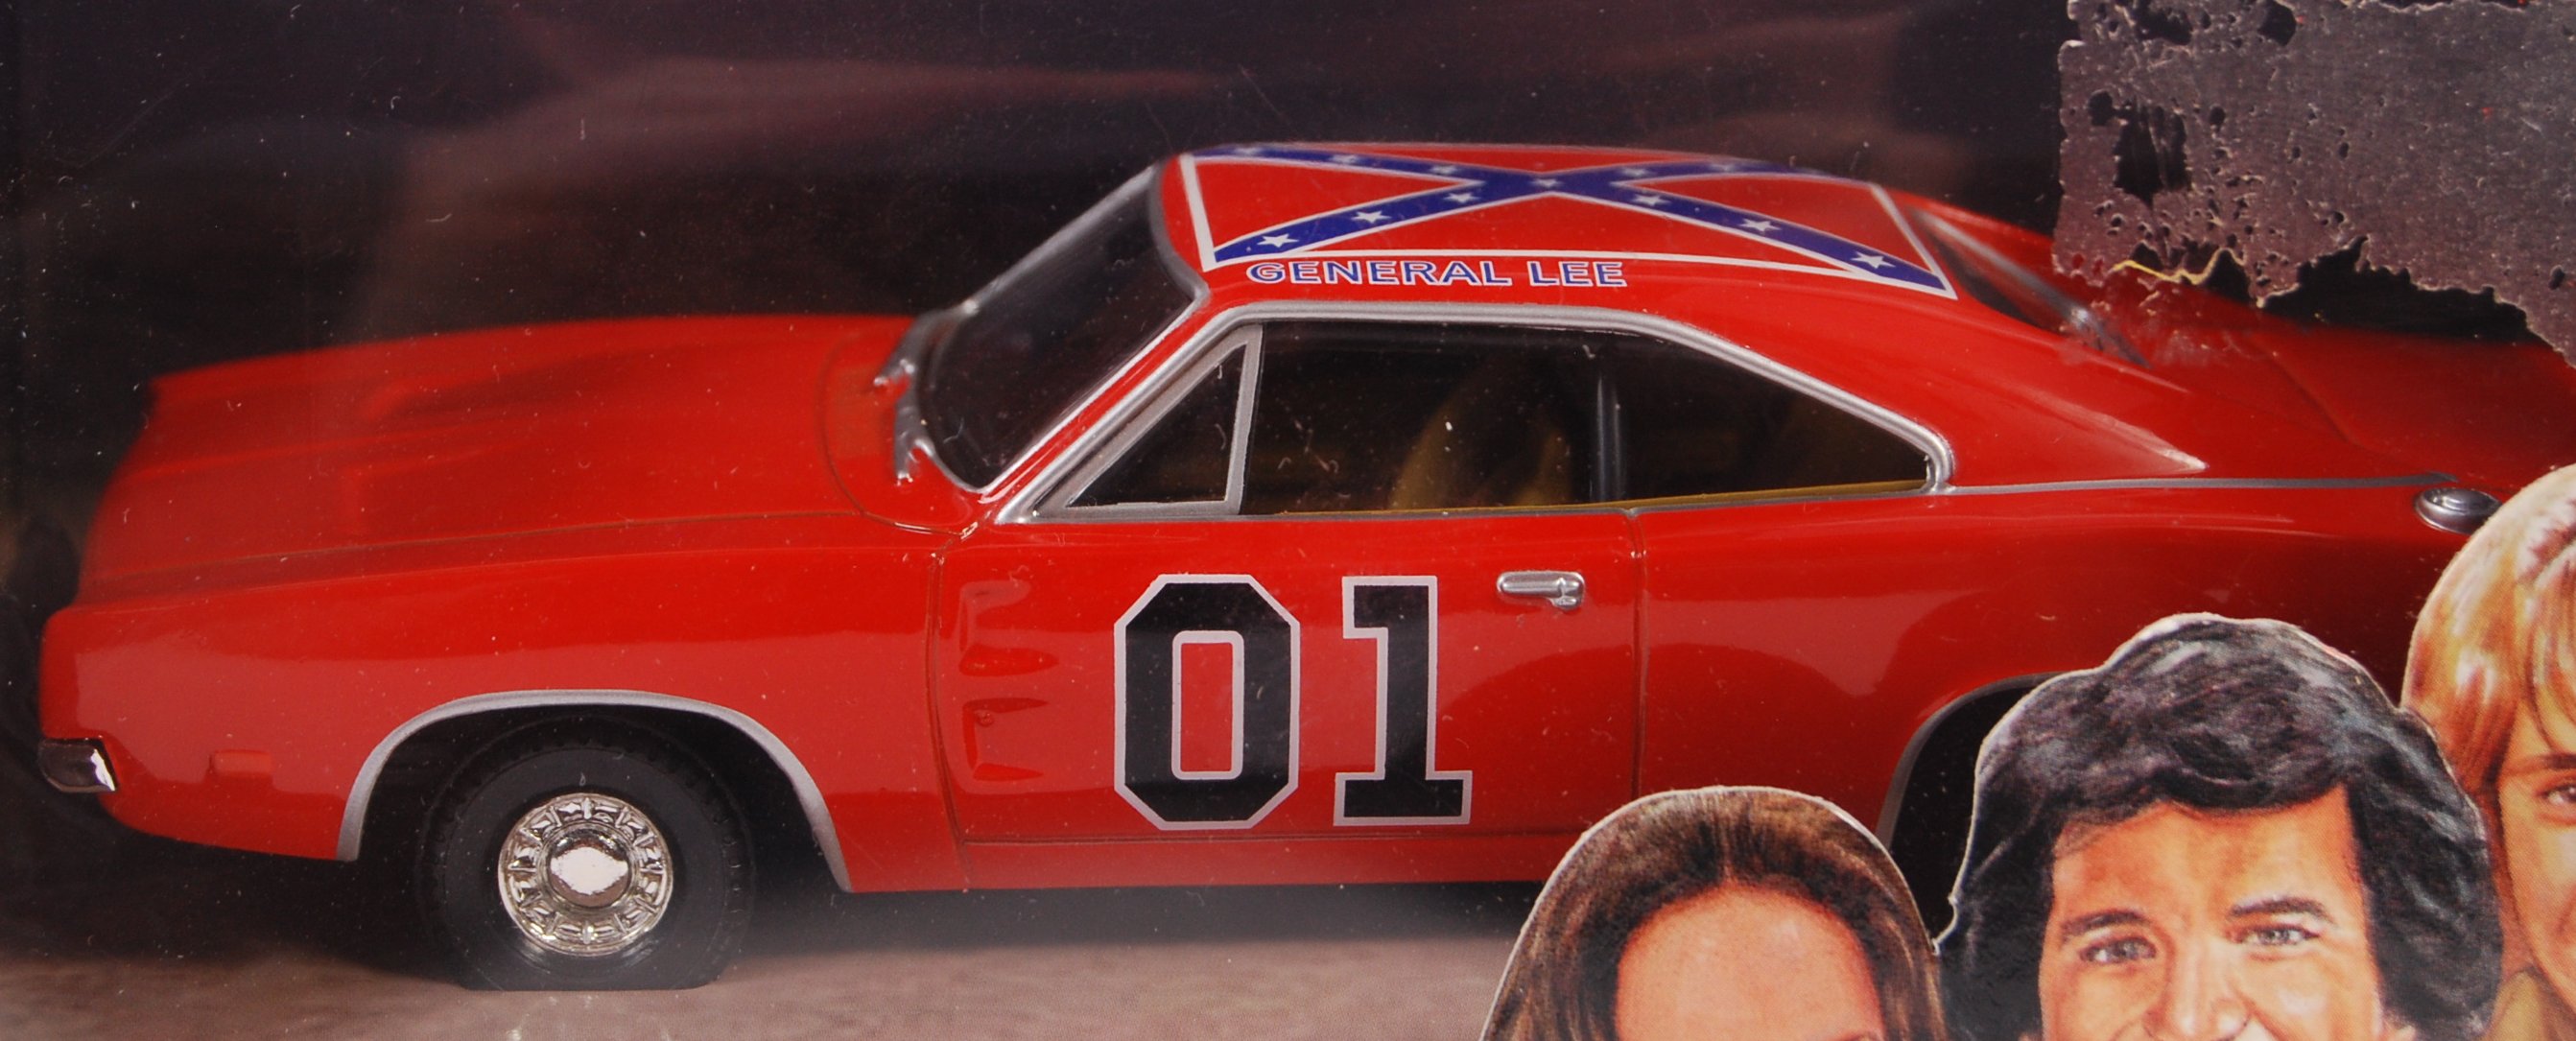 CORGI THE DUKES OF HAZZARD DODGE CHARGER AND FIGURES SET - Image 2 of 4